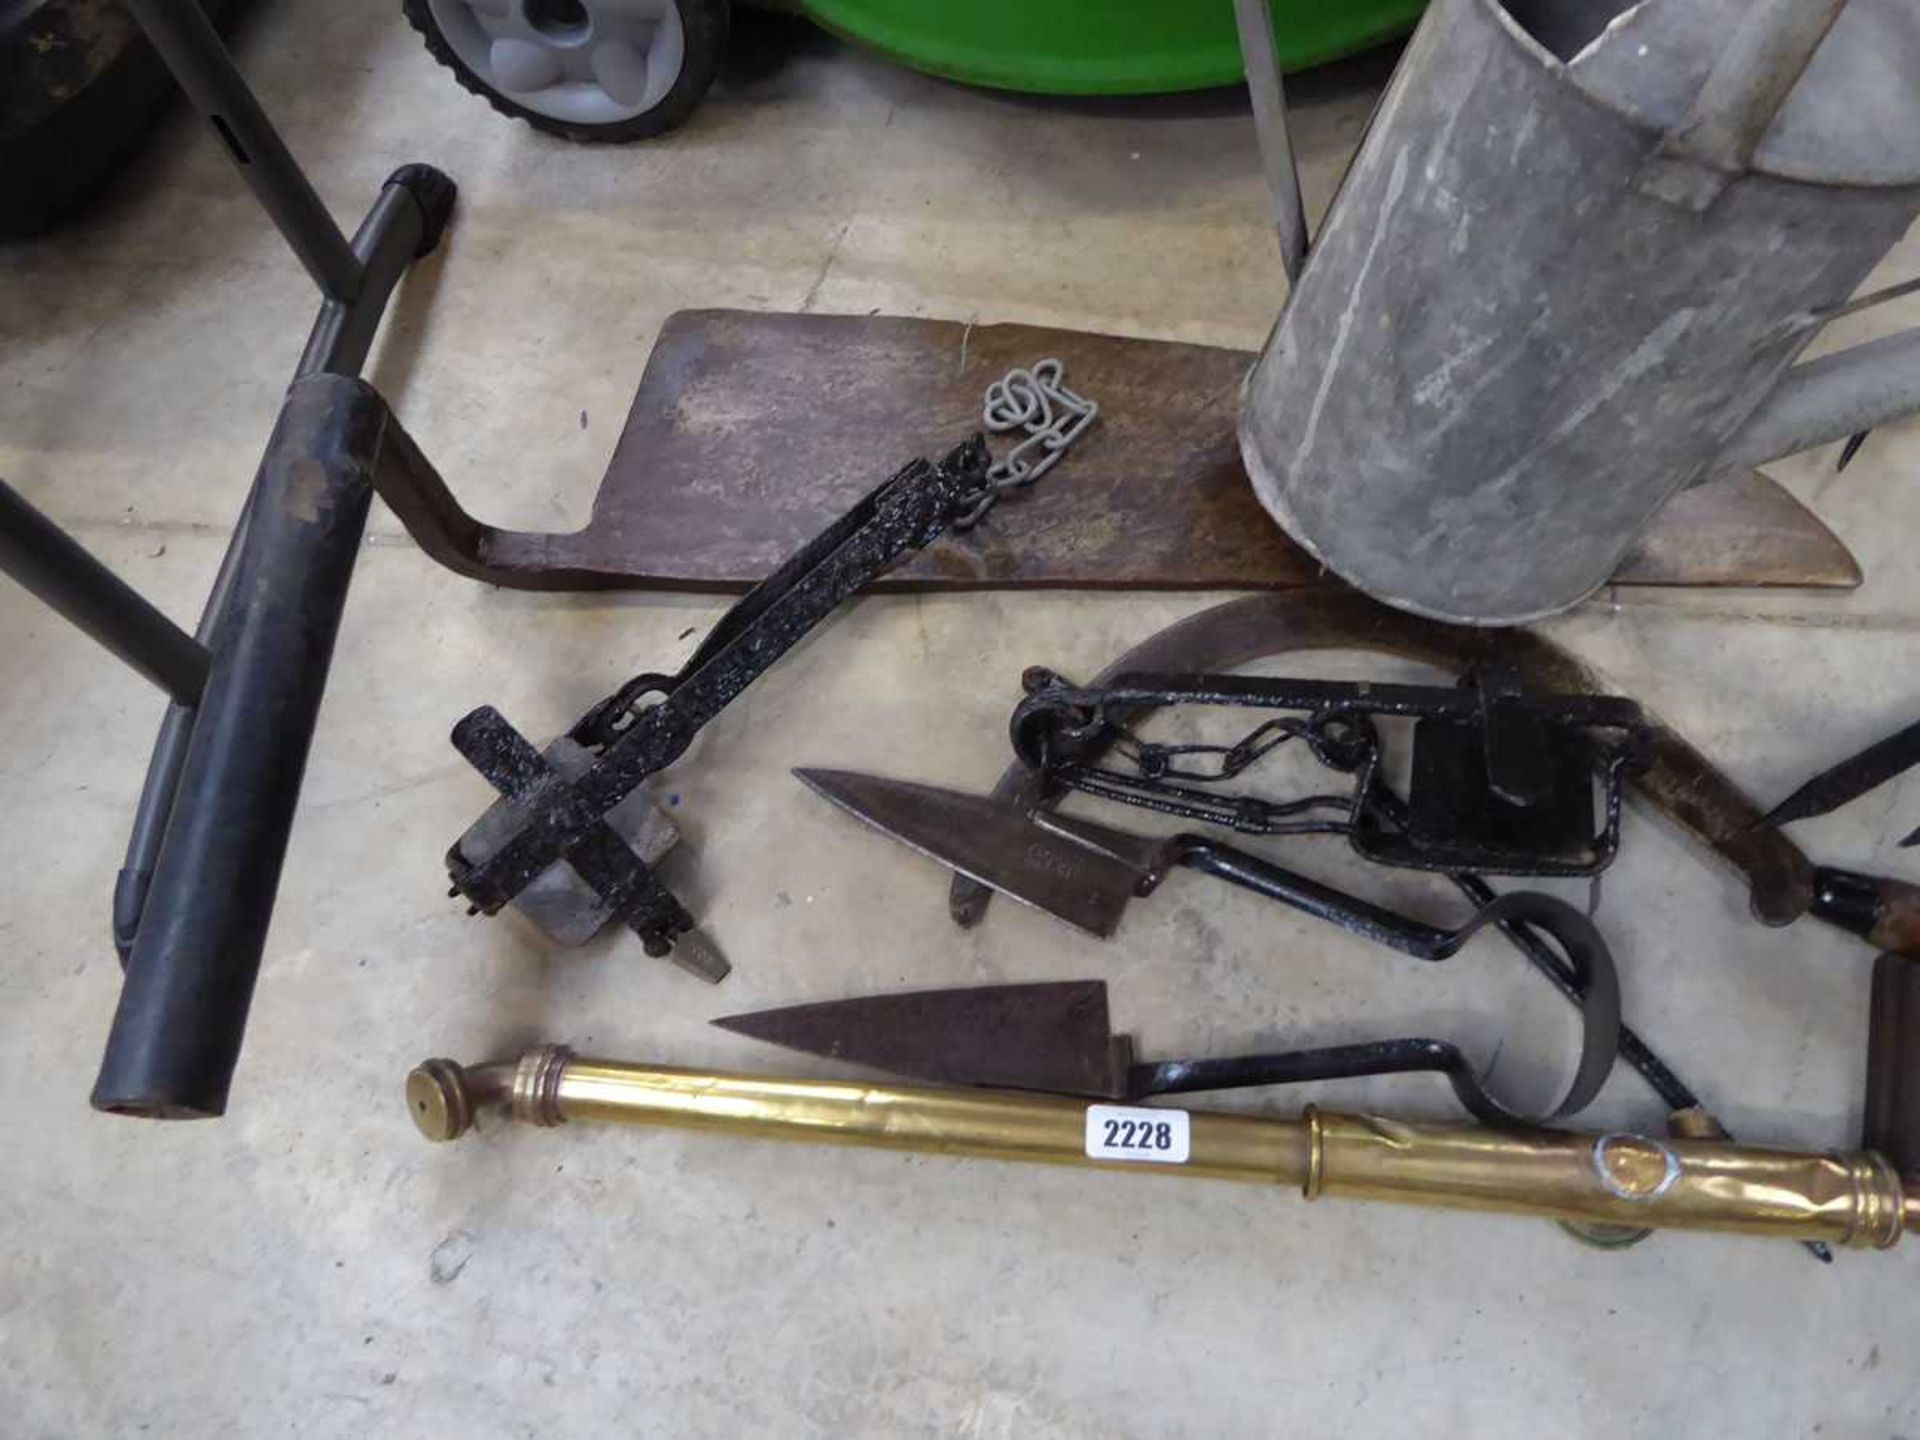 Assorted vintage hand tools and implements incl. scythe, brass wooden handled pump, pair of sheep - Image 3 of 3